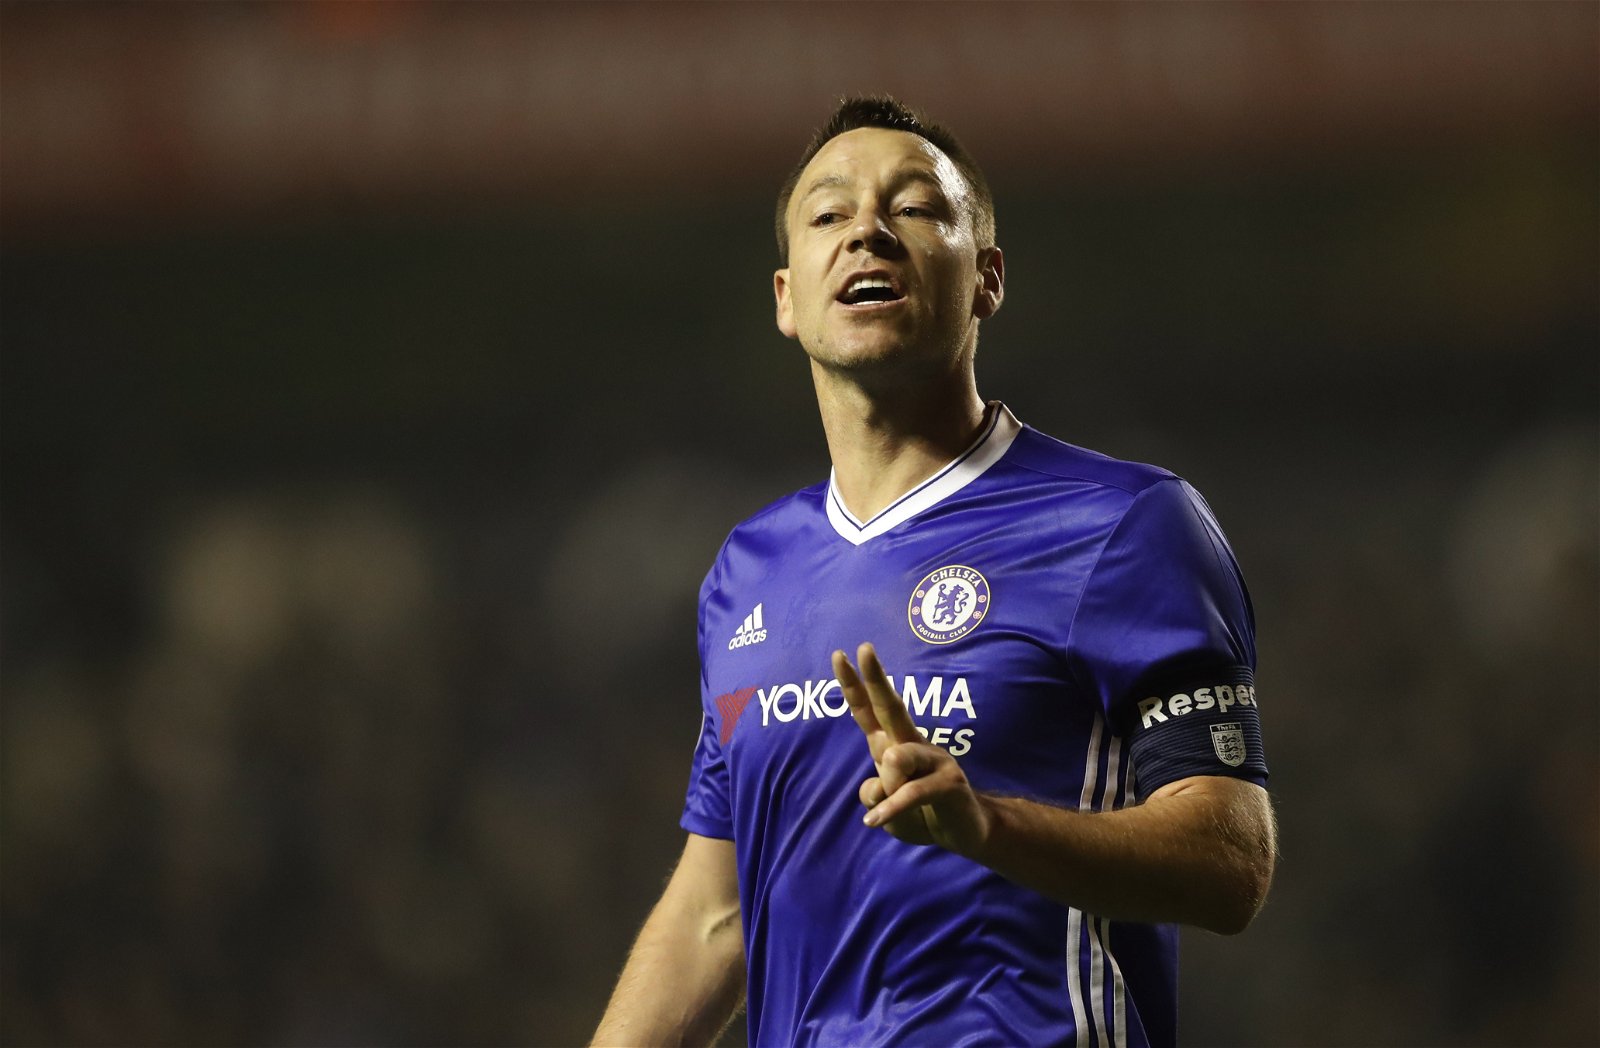 The best centre back in Premier League history - John Terry